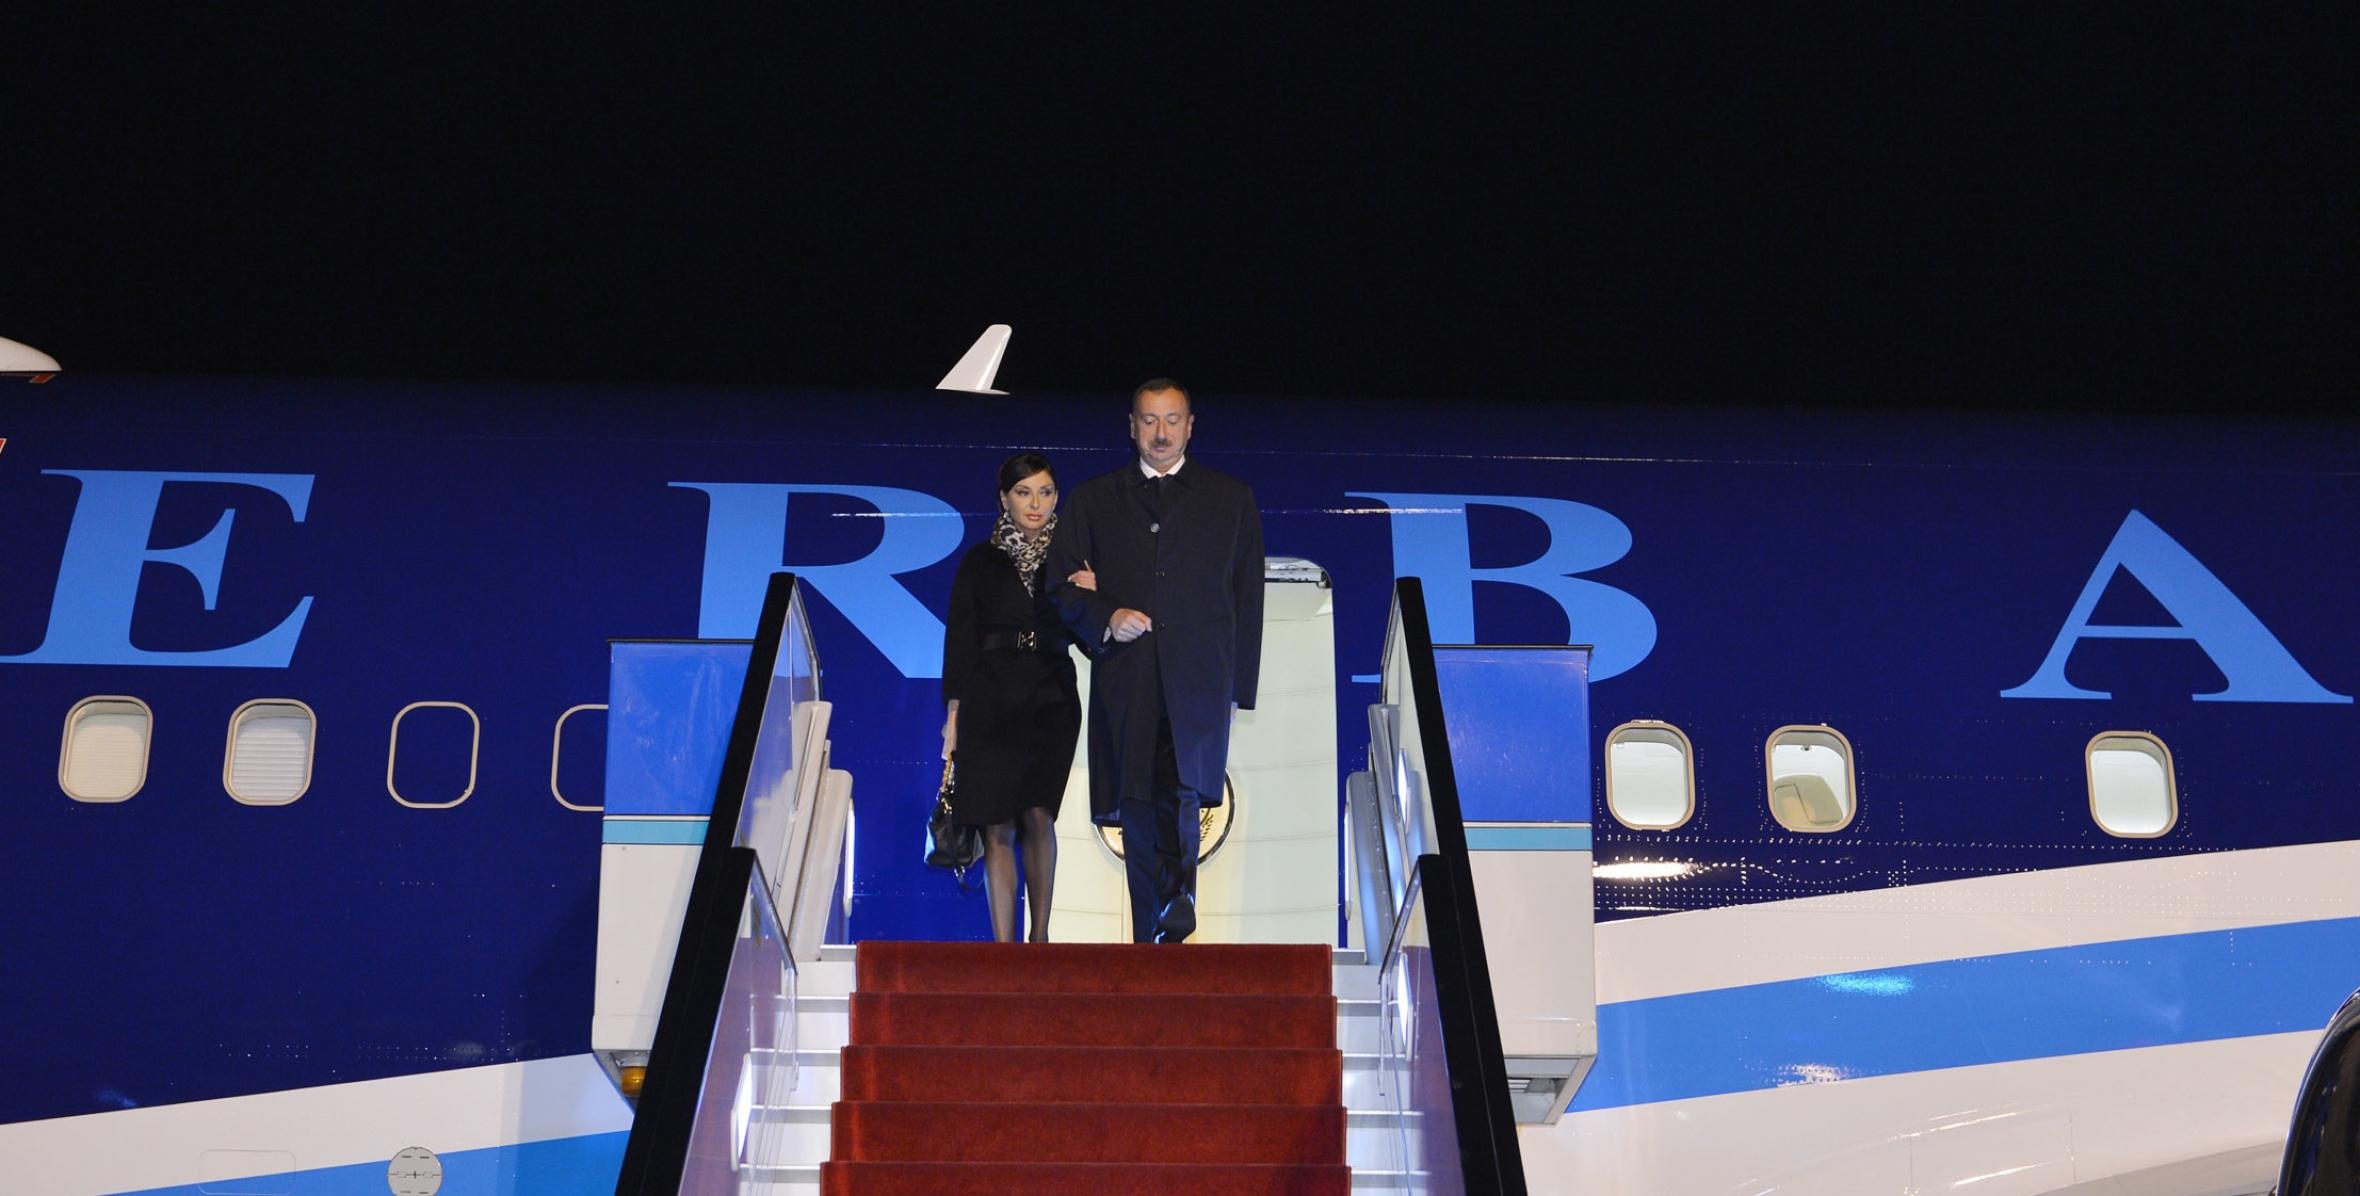 Ilham Aliyev has arrived in the Republic of Turkey on an official visit